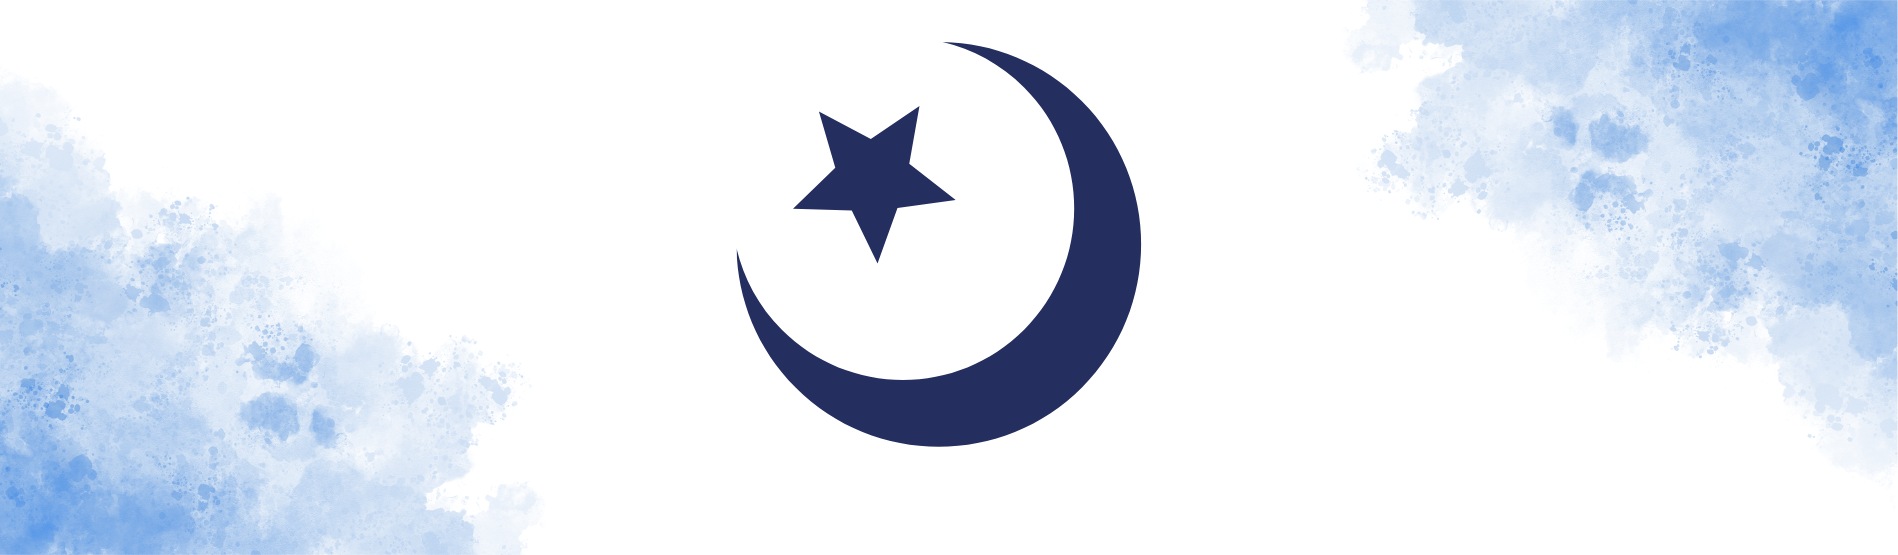 Islamic symbol of crescent moon and star